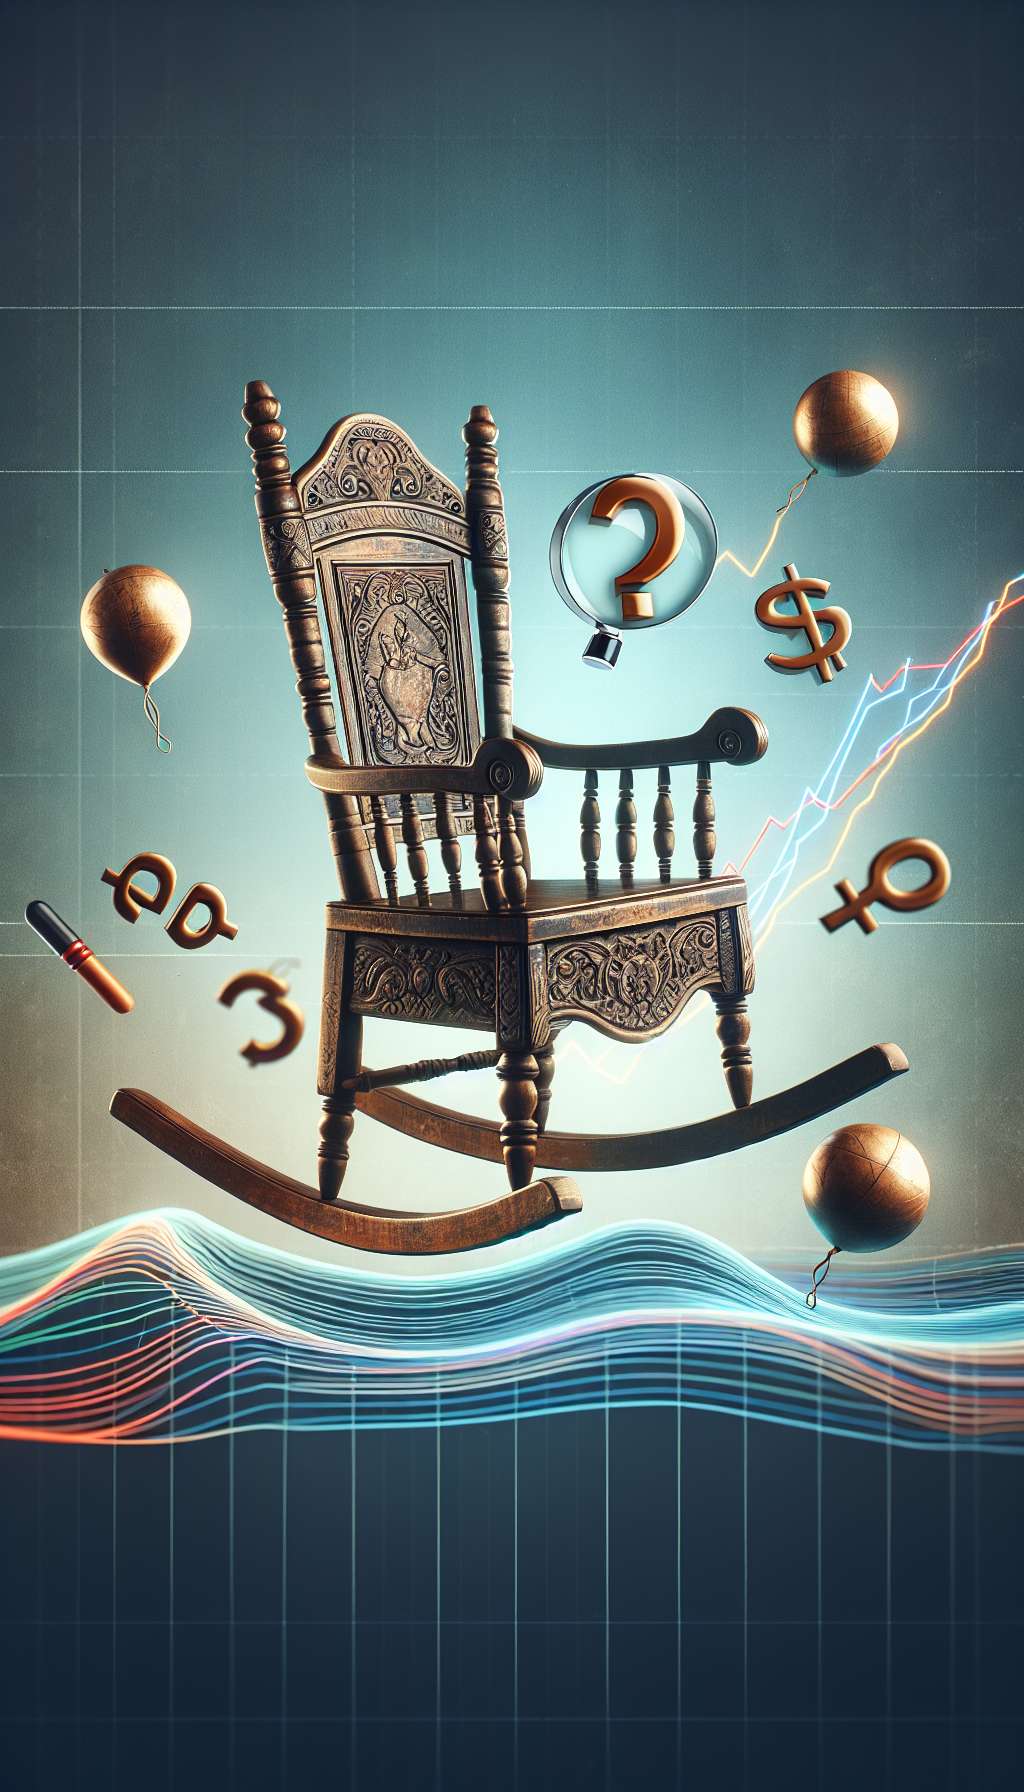 An antique rocking chair atop a fluctuating graph line as if riding ocean waves, with dollar signs and question marks bobbing around it. A magnifying glass hovers over, scrutinizing trend lines that weave through the chair's ornate carvings, indicating the scrutiny of supply and demand on its value. The chair's patina and intricate detailing subtly glow, hinting at its underlying worth.